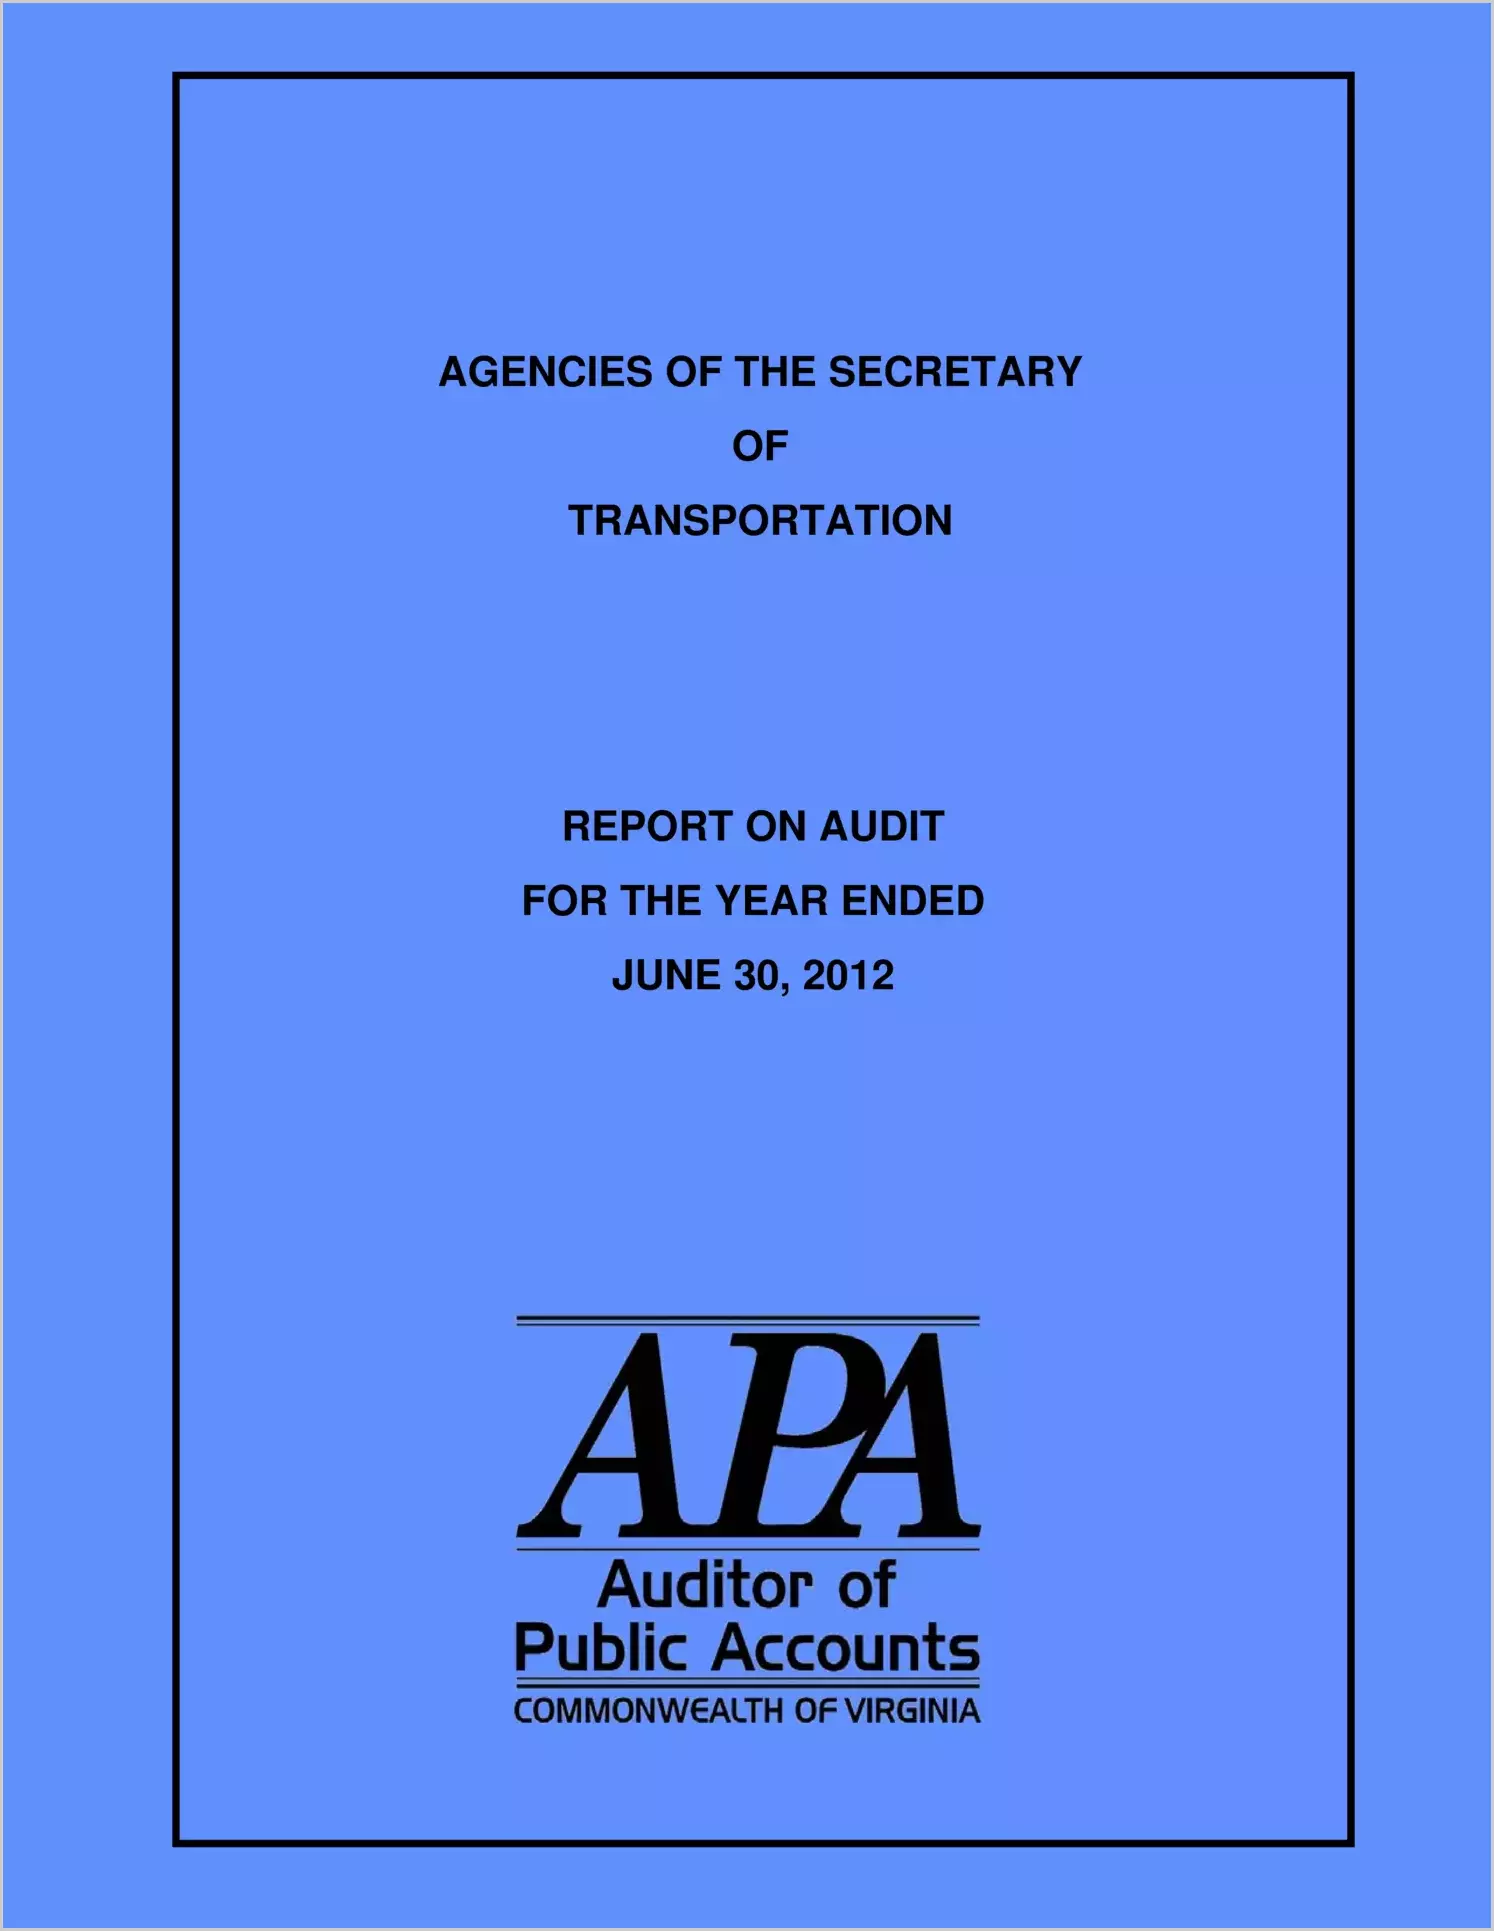 Agencies of the Secretary of Transportation for the year ended June 30, 2012